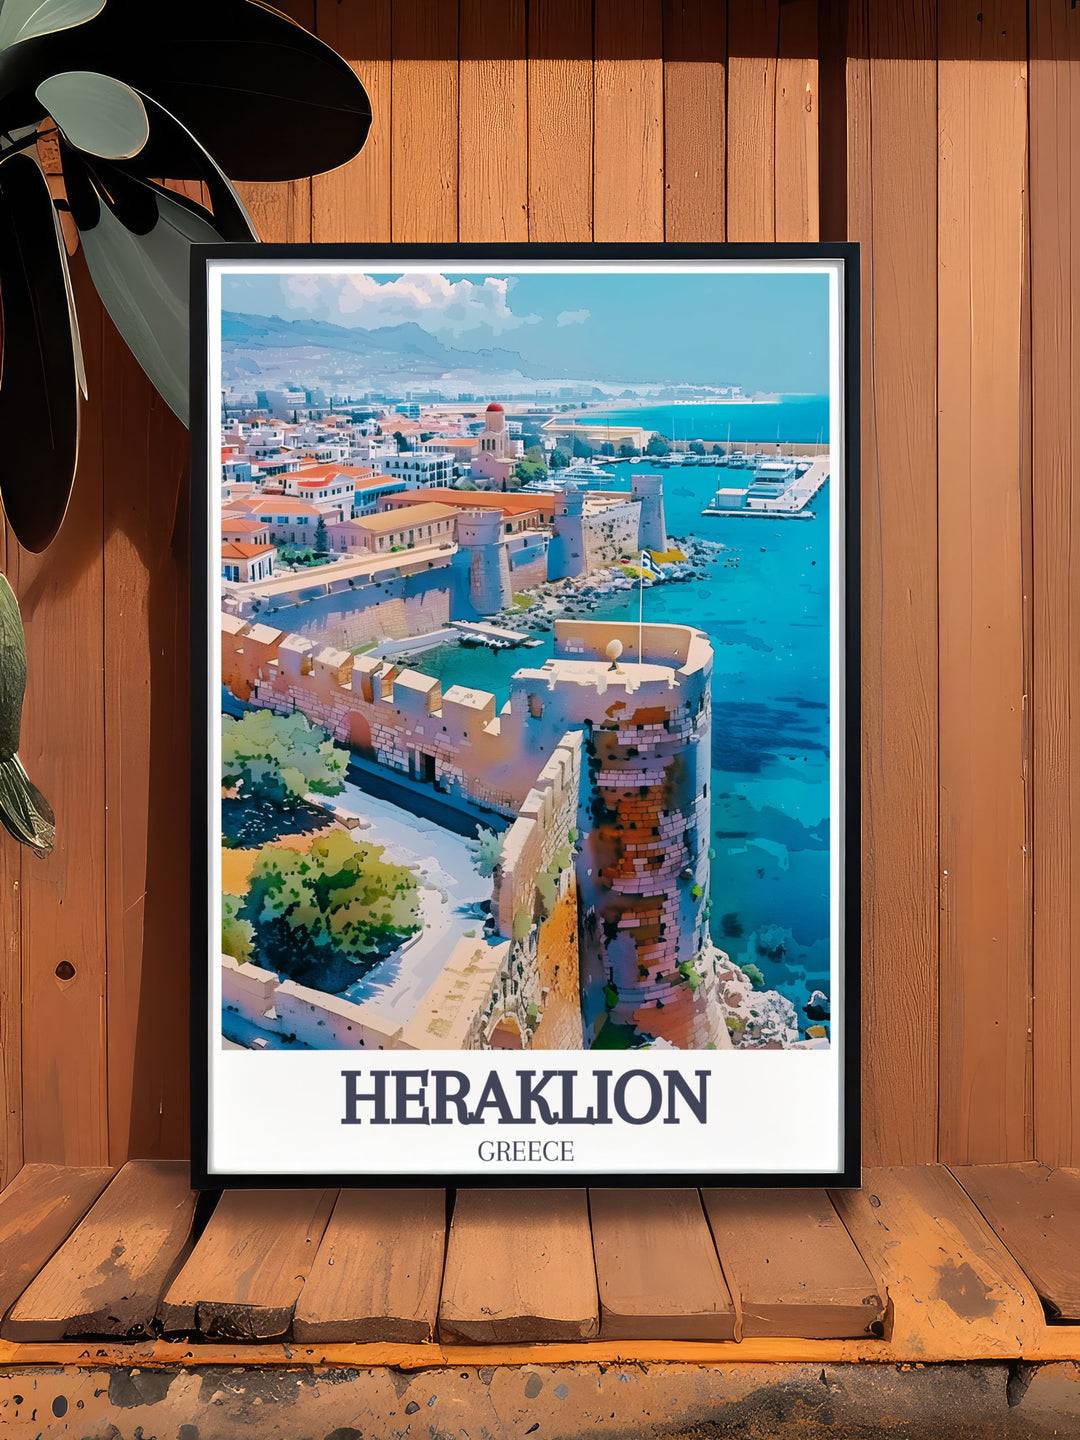 Vintage poster of Heraklion, featuring the iconic Venetian Walls, Crete, Greece. This piece captures the timeless beauty and historical significance of the walls, evoking the charm of Greek cultural heritage and military architecture.